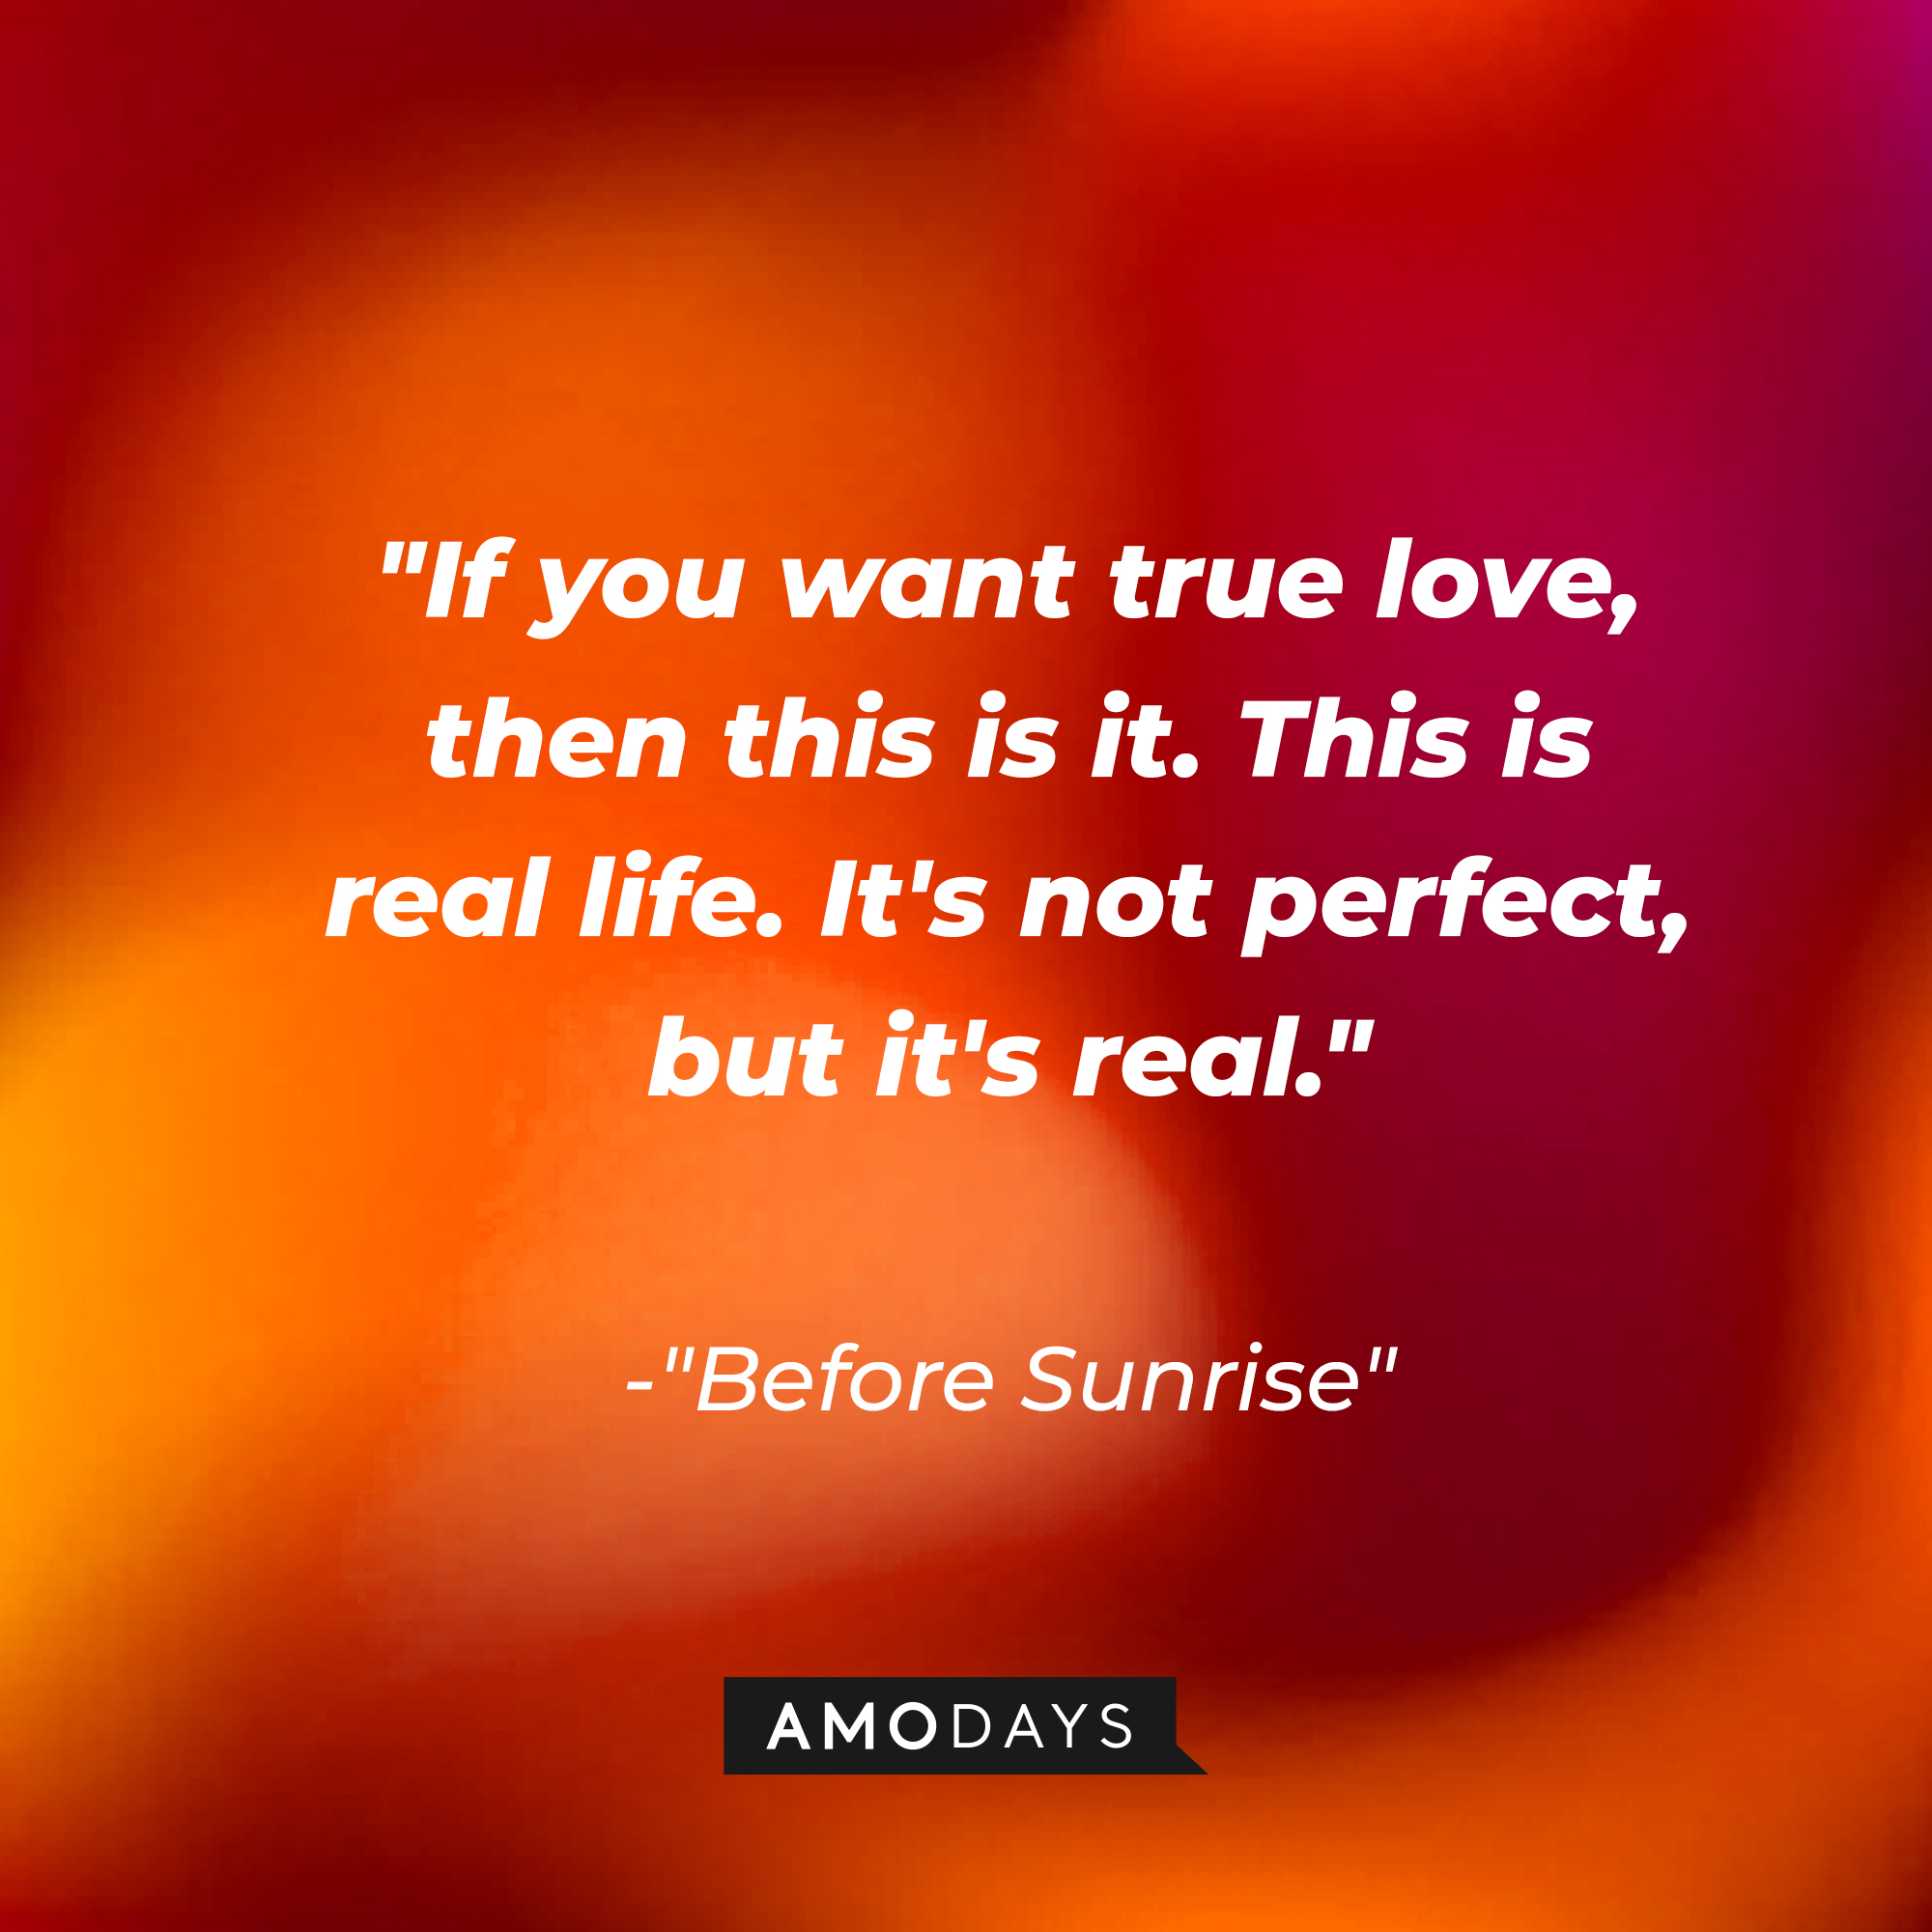 "Before Sunrise" quote: "If you want true love, then this is it. This is real life. It's not perfect, but it's real." | Source: AmoDays